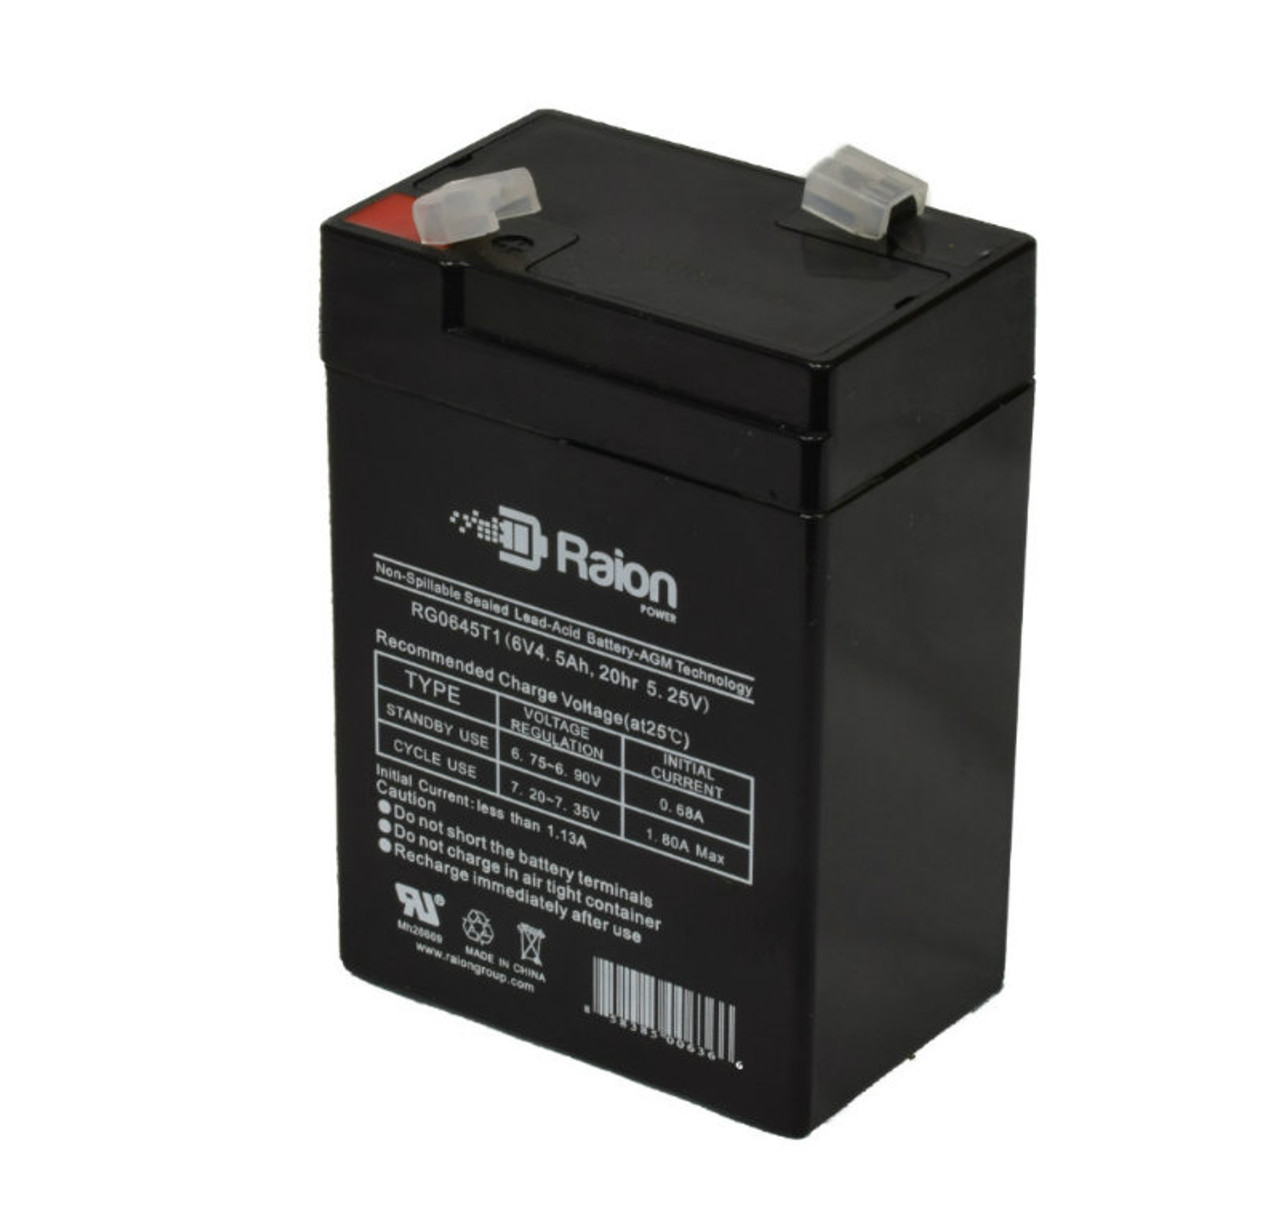 Raion Power RG0645T1 6V 4.5Ah Replacement Battery Cartridge for Motoma MS6V5S